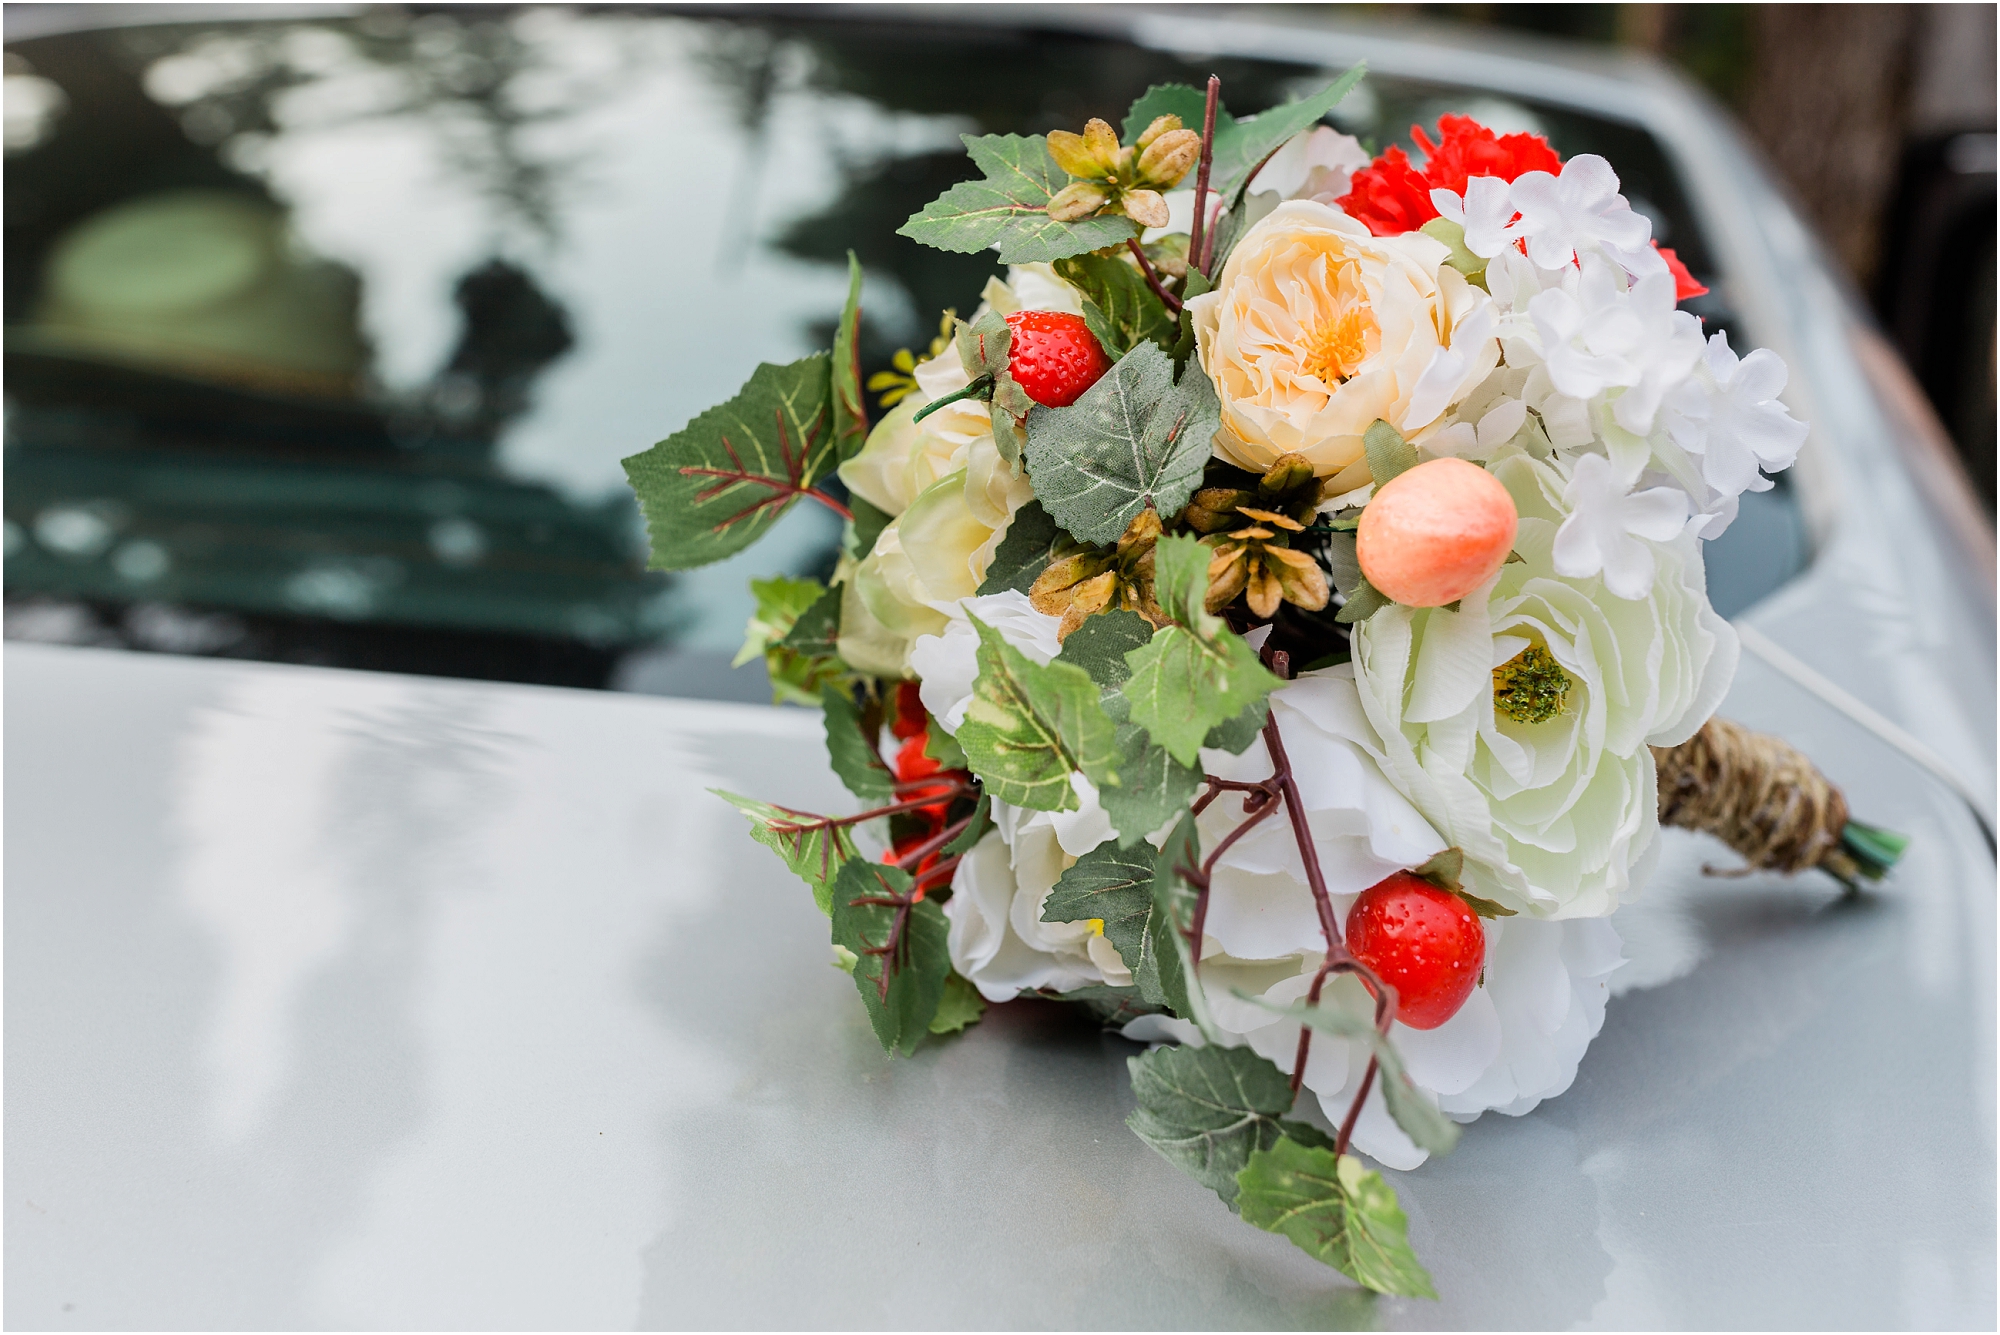 A beautiful DIY bouquet made from fake flowers, strawberries and greenery for an elopement at Crater Lake National Park in Oregon. | Erica Swantek Photography